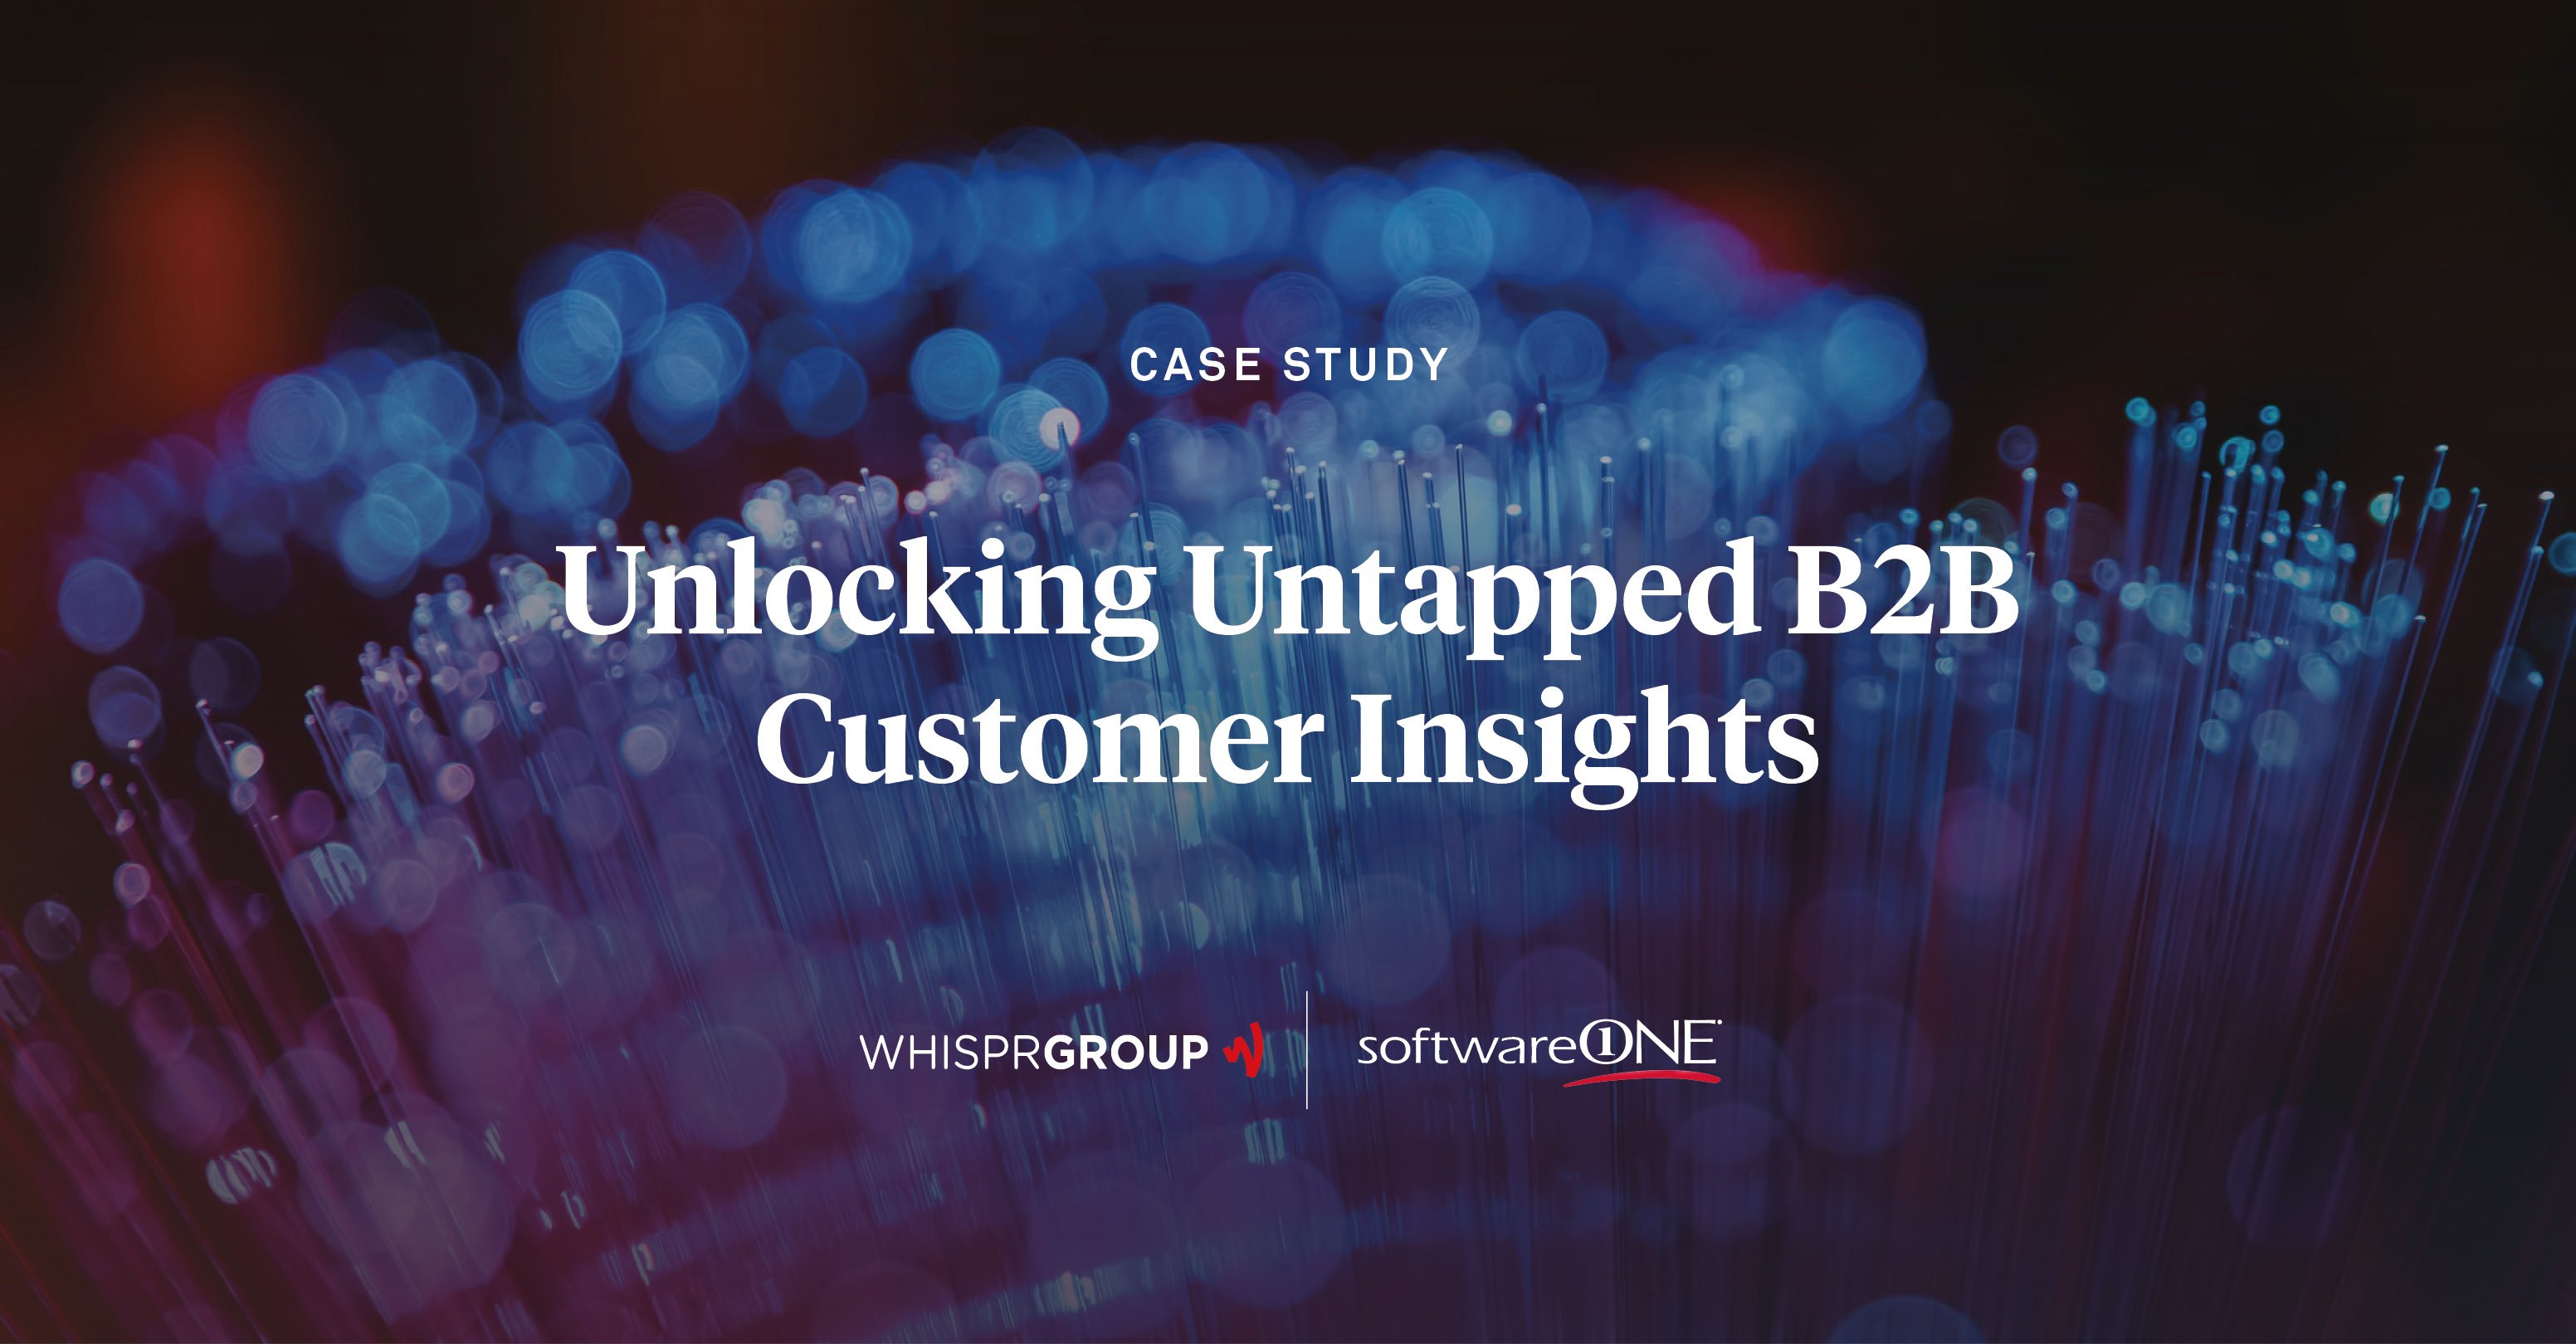 SoftwareONE tasked Whispr Group with providing insights on their hard-to-track niche target group